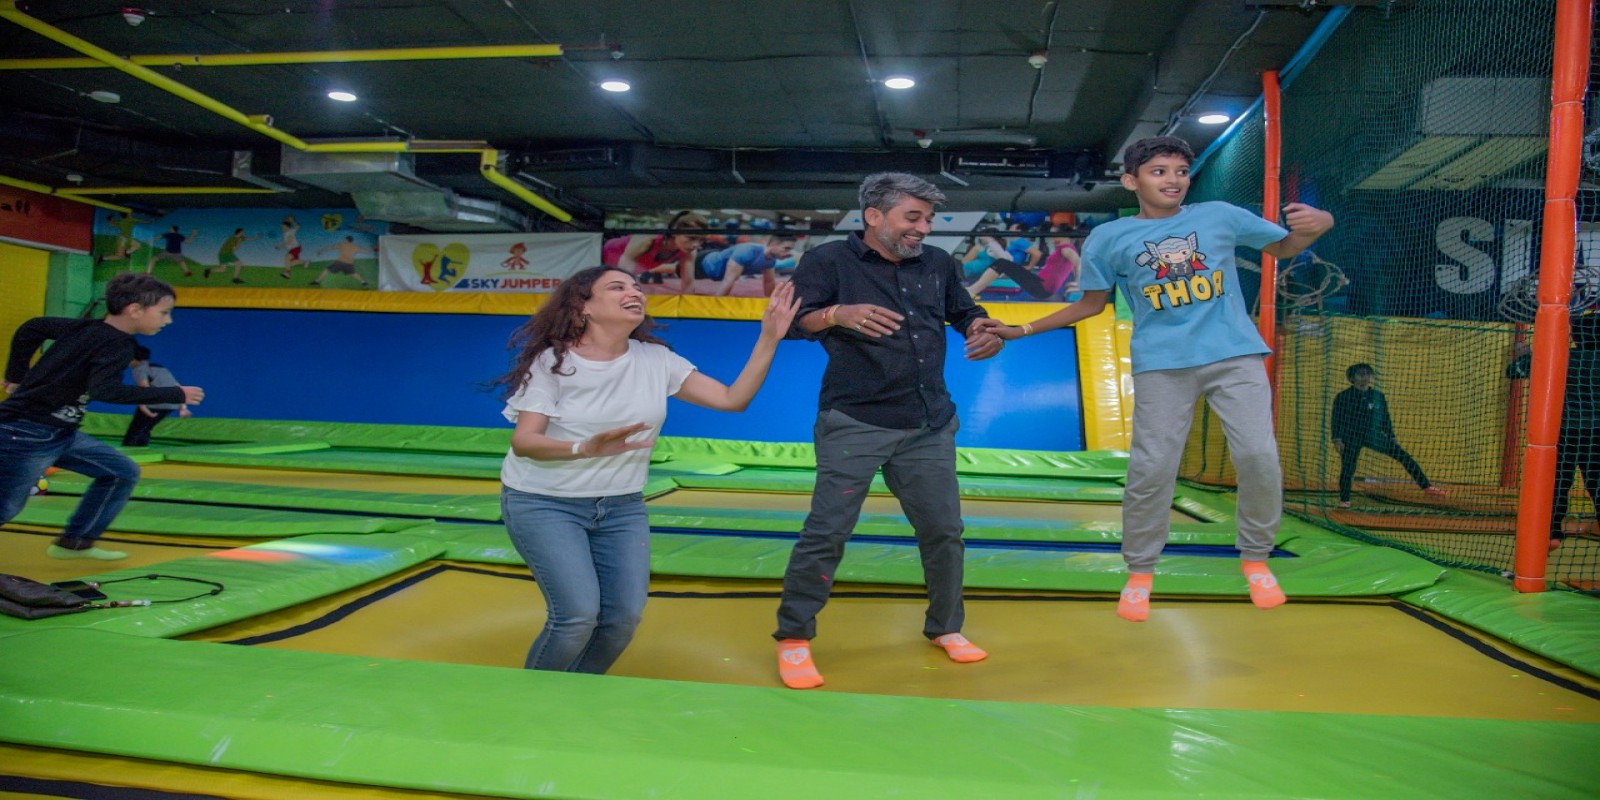 A Day of Excitement What to Expect at Sky Jumper Trampoline Park with Your Family